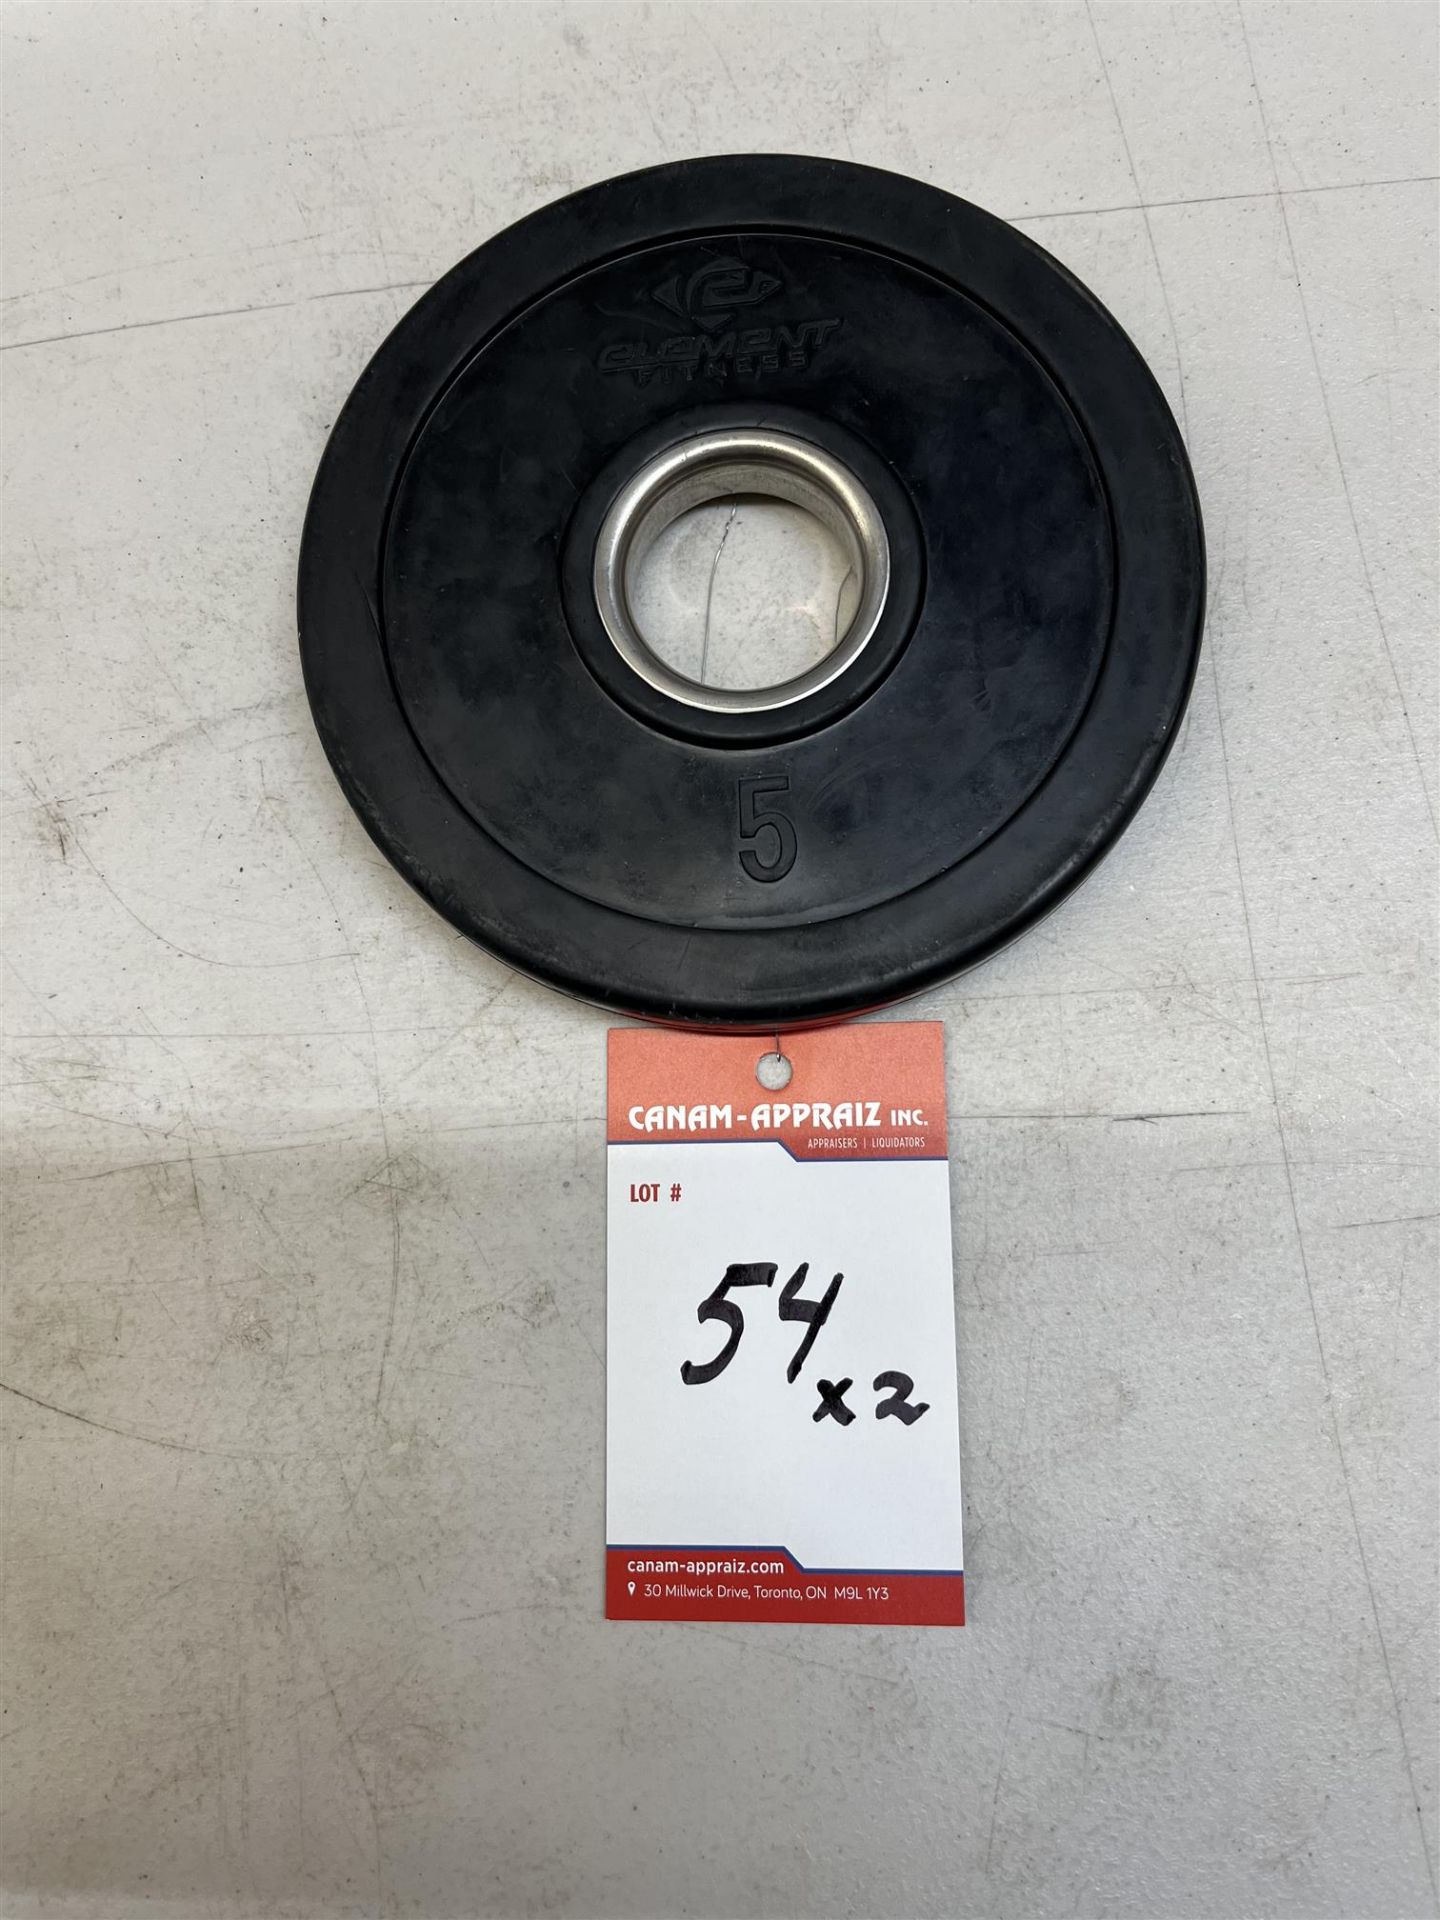 Rubber Plate 5 lbs - Quantity: x2